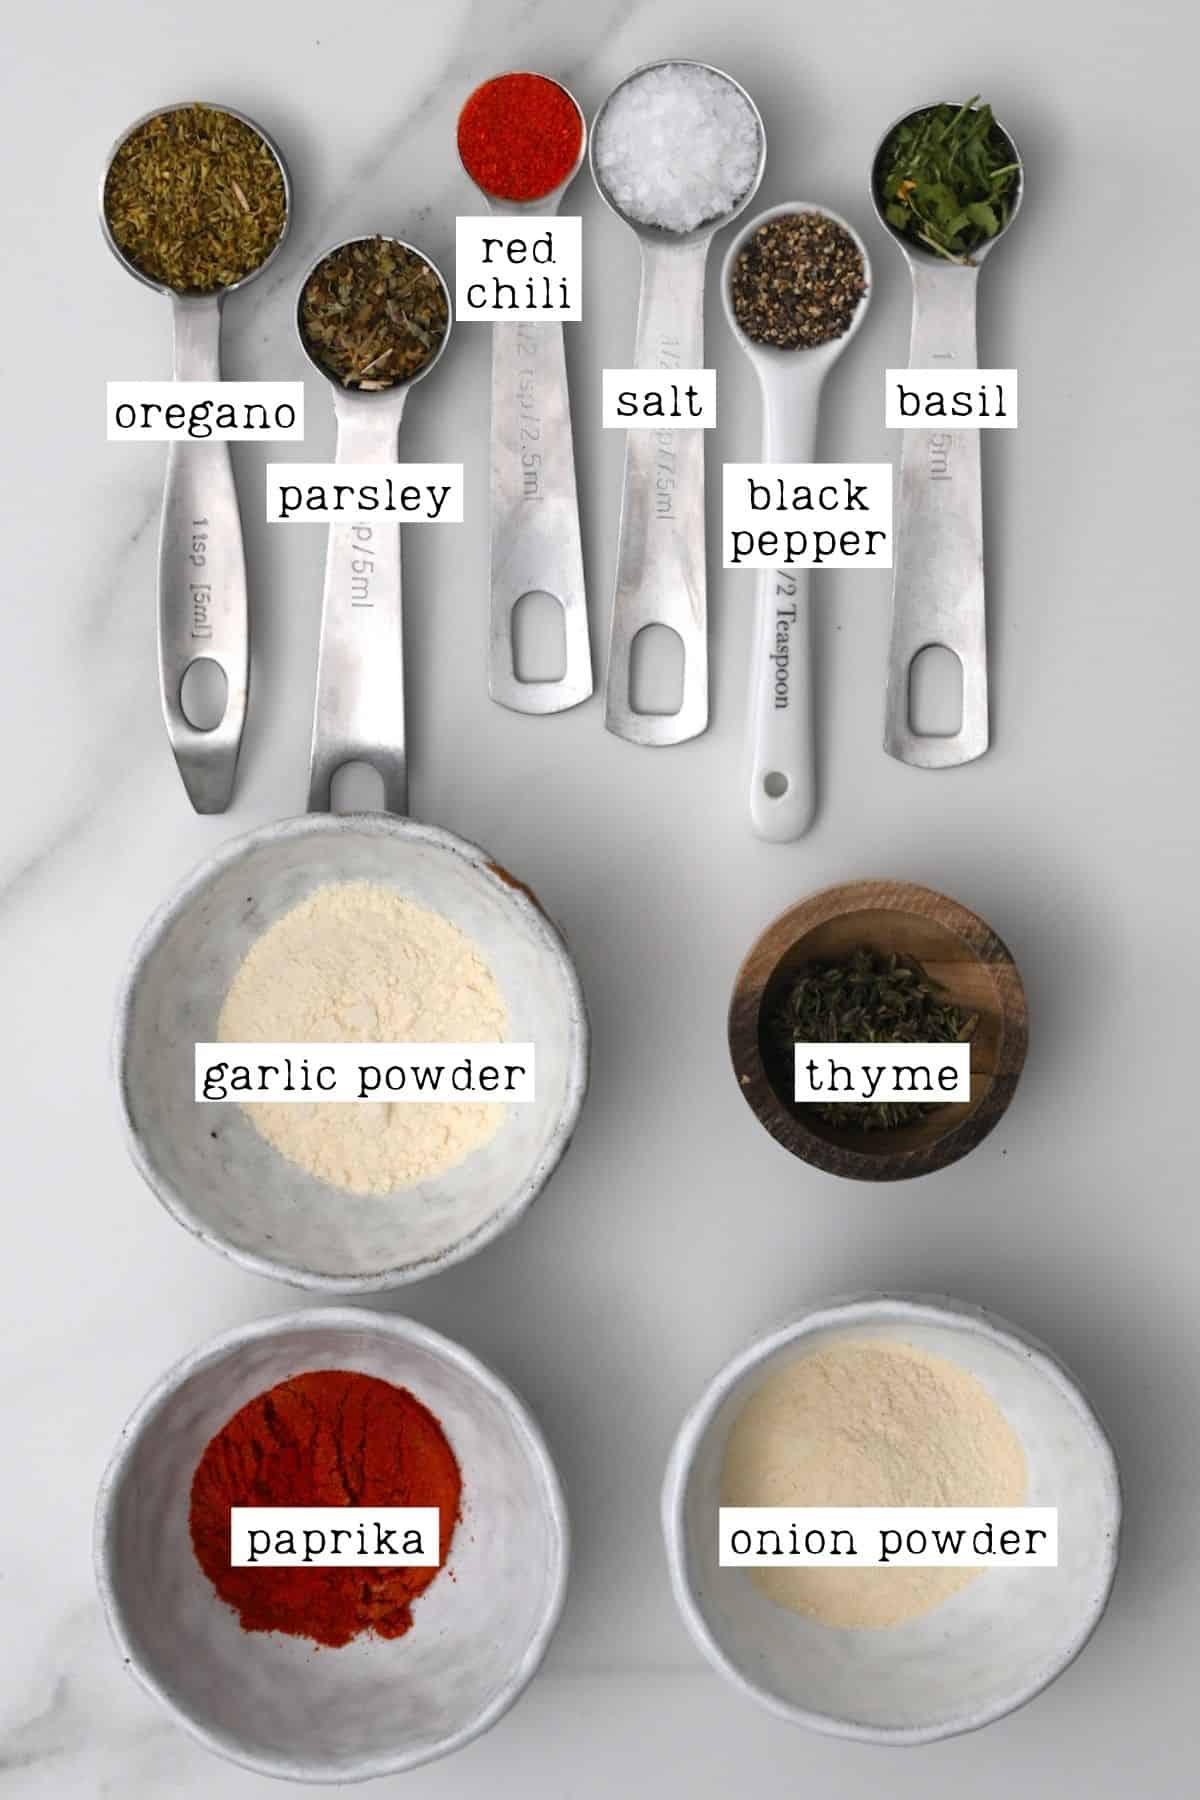 https://www.alphafoodie.com/wp-content/uploads/2022/03/French-Fry-Seasoning-Ingredients-for-french-fry-seasoning.jpeg